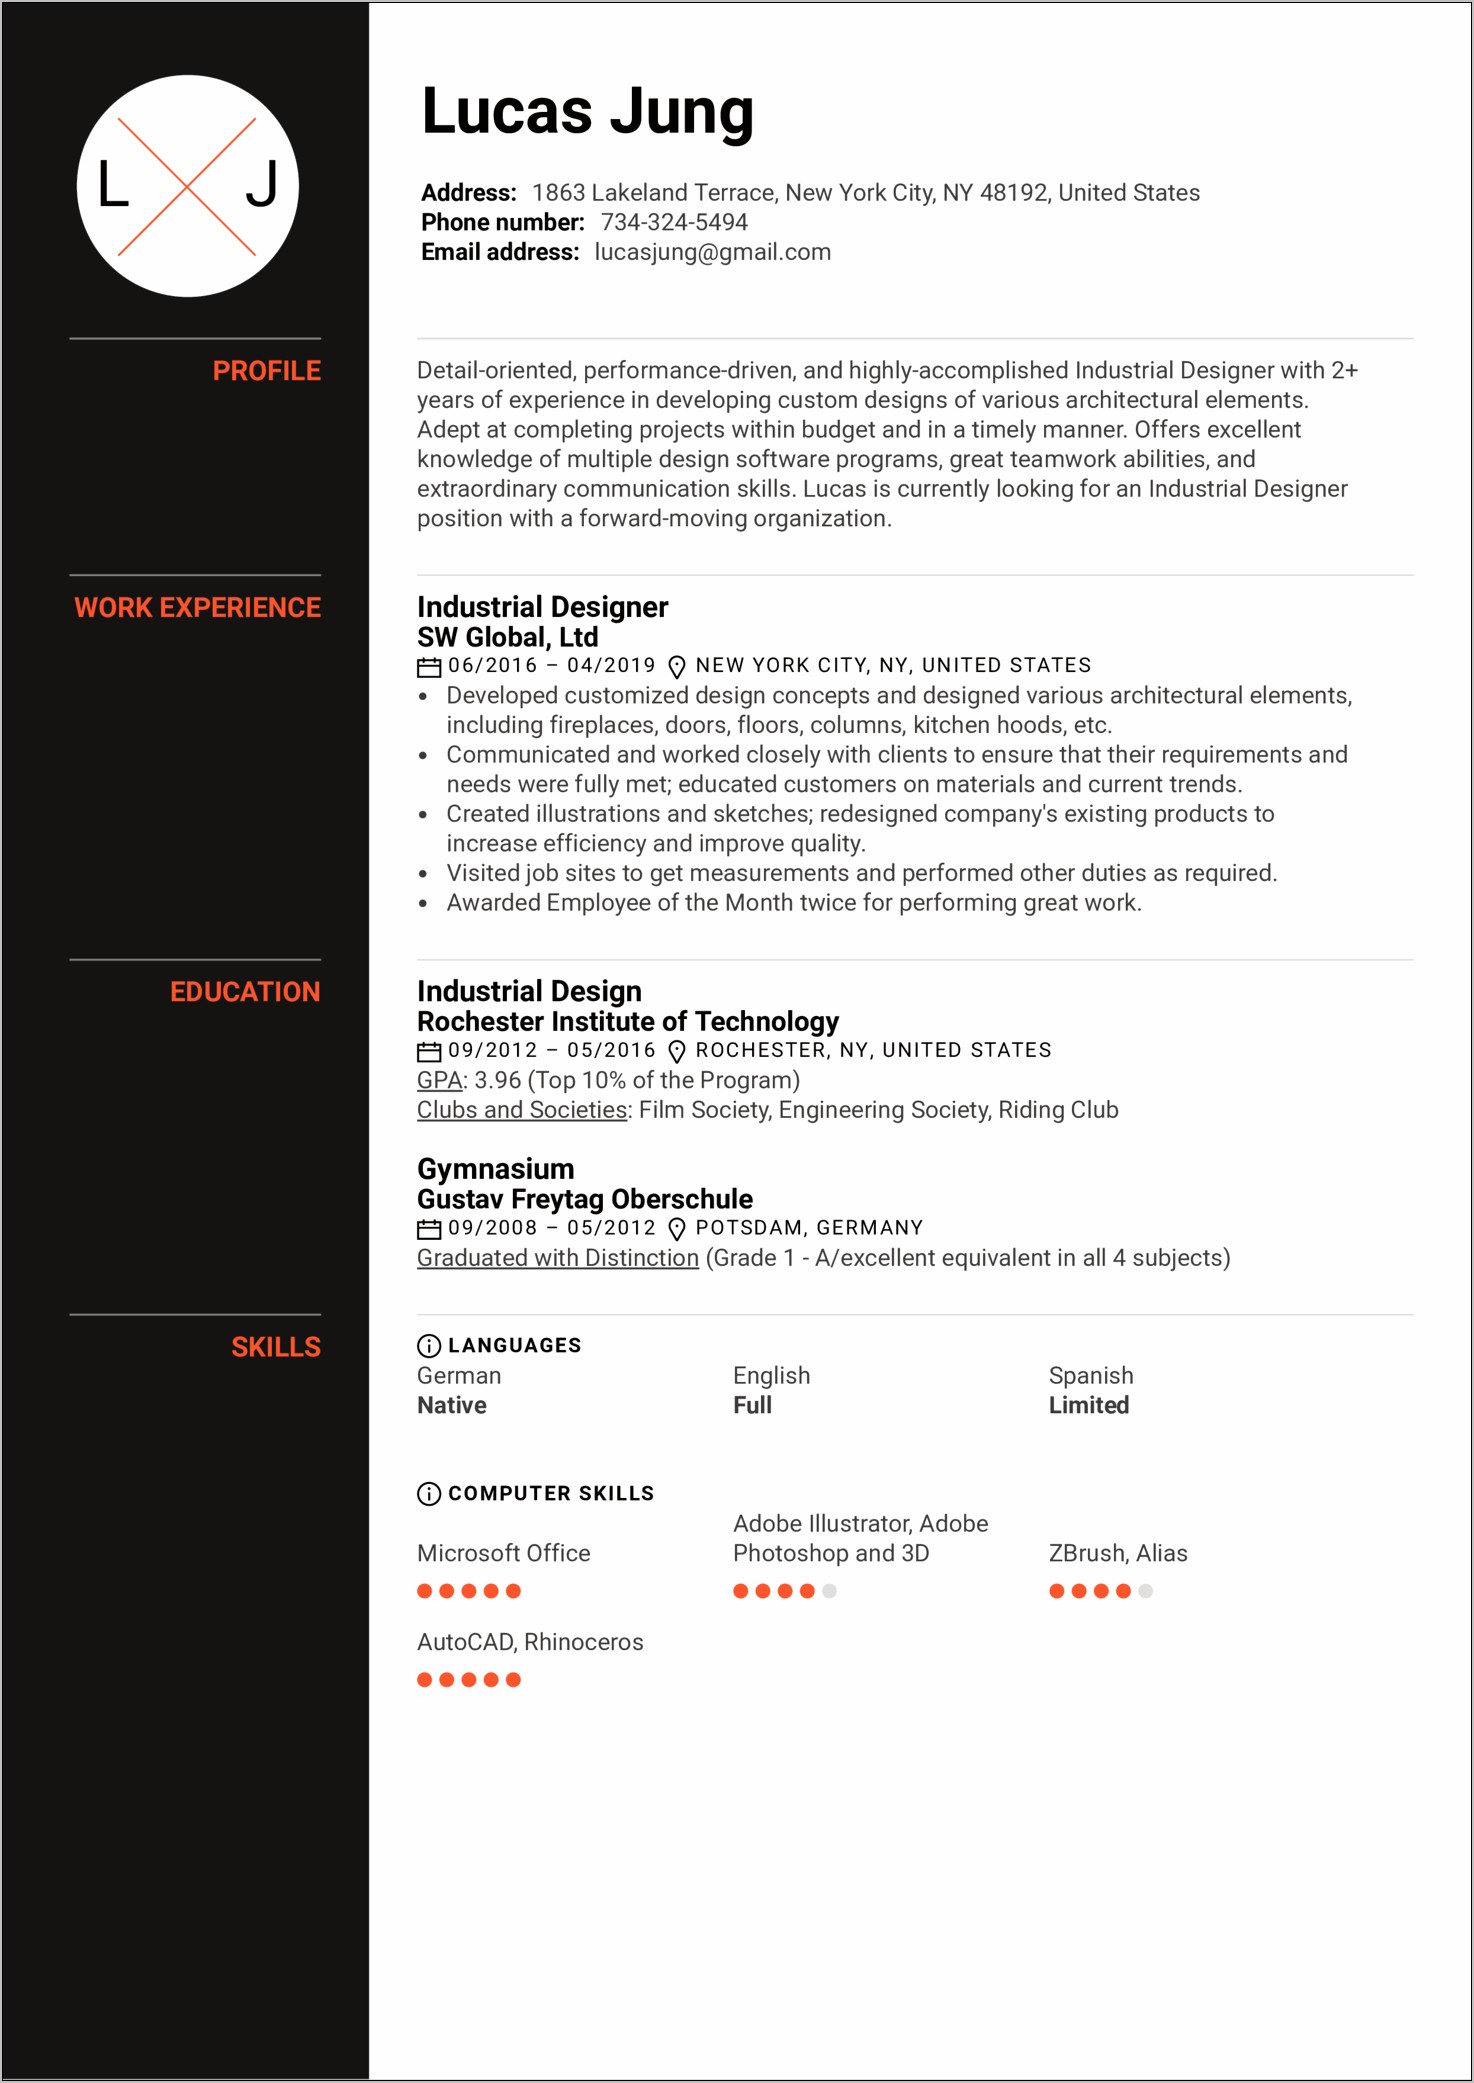 Resume For 1 Year Experience In Autocad